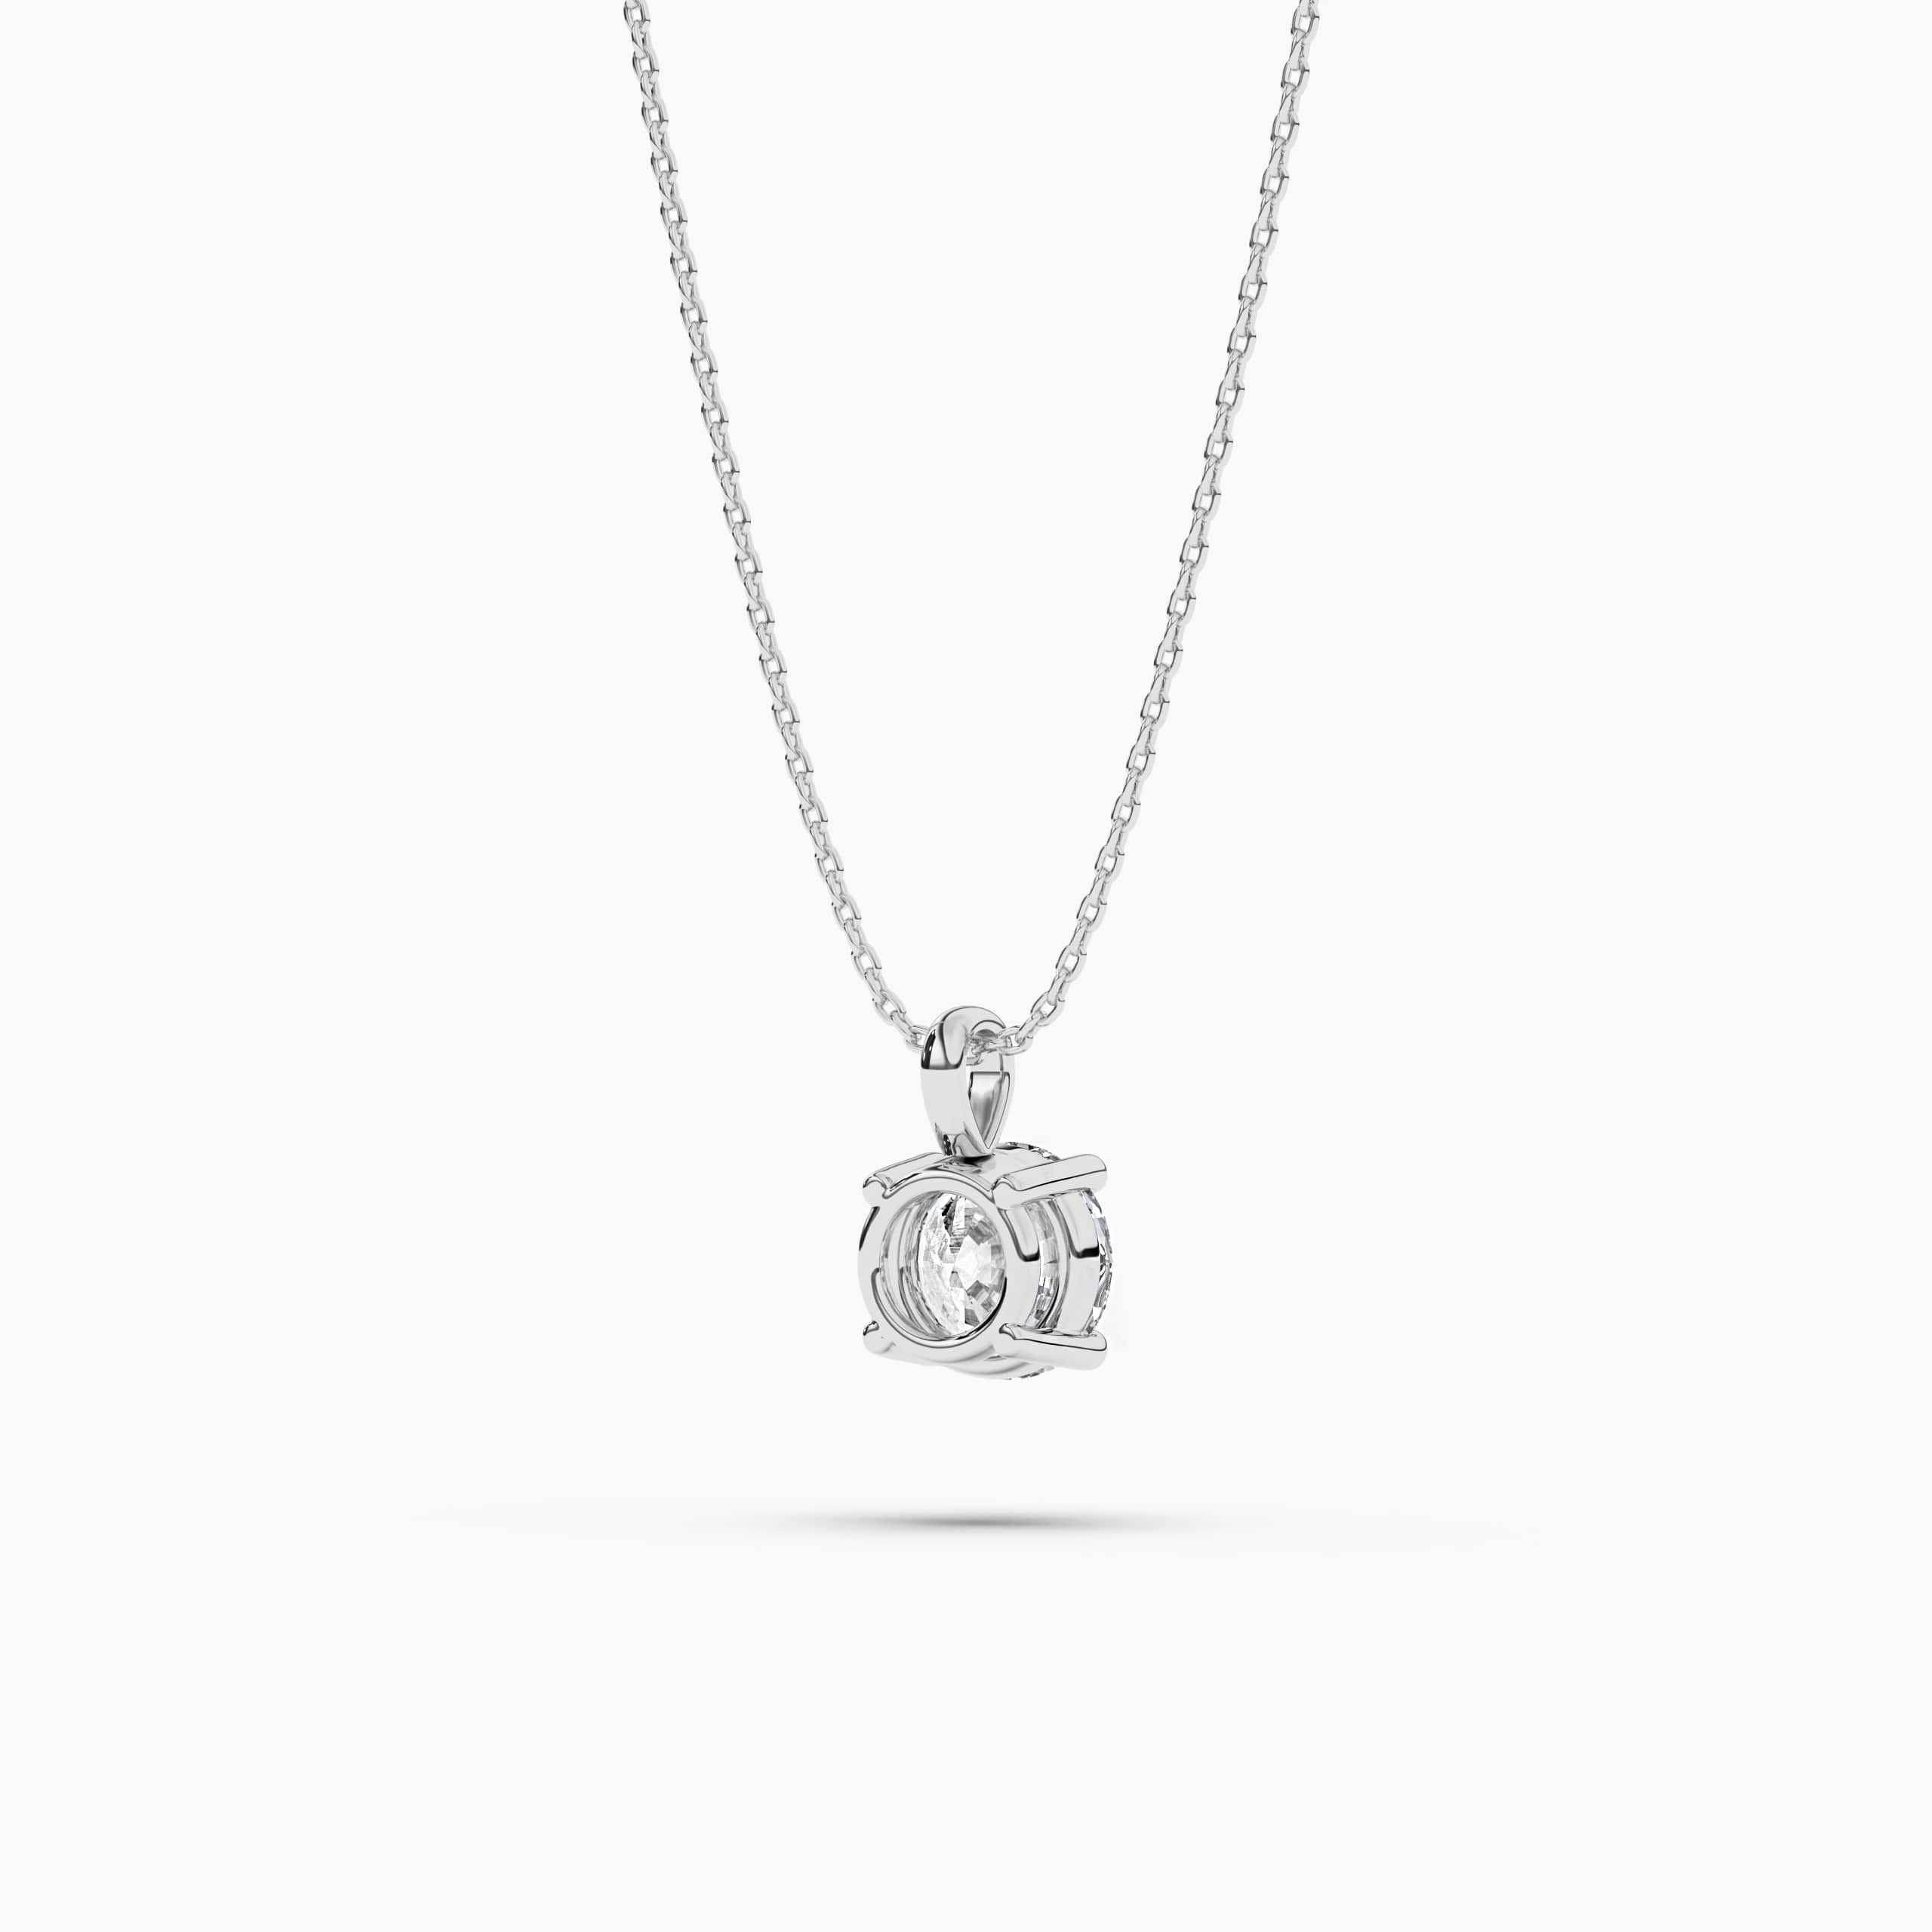 SOLITAIRE NATURAL DIAMOND PENDANT NECKLACE ROUND CUT SOLID WHITE GOLD